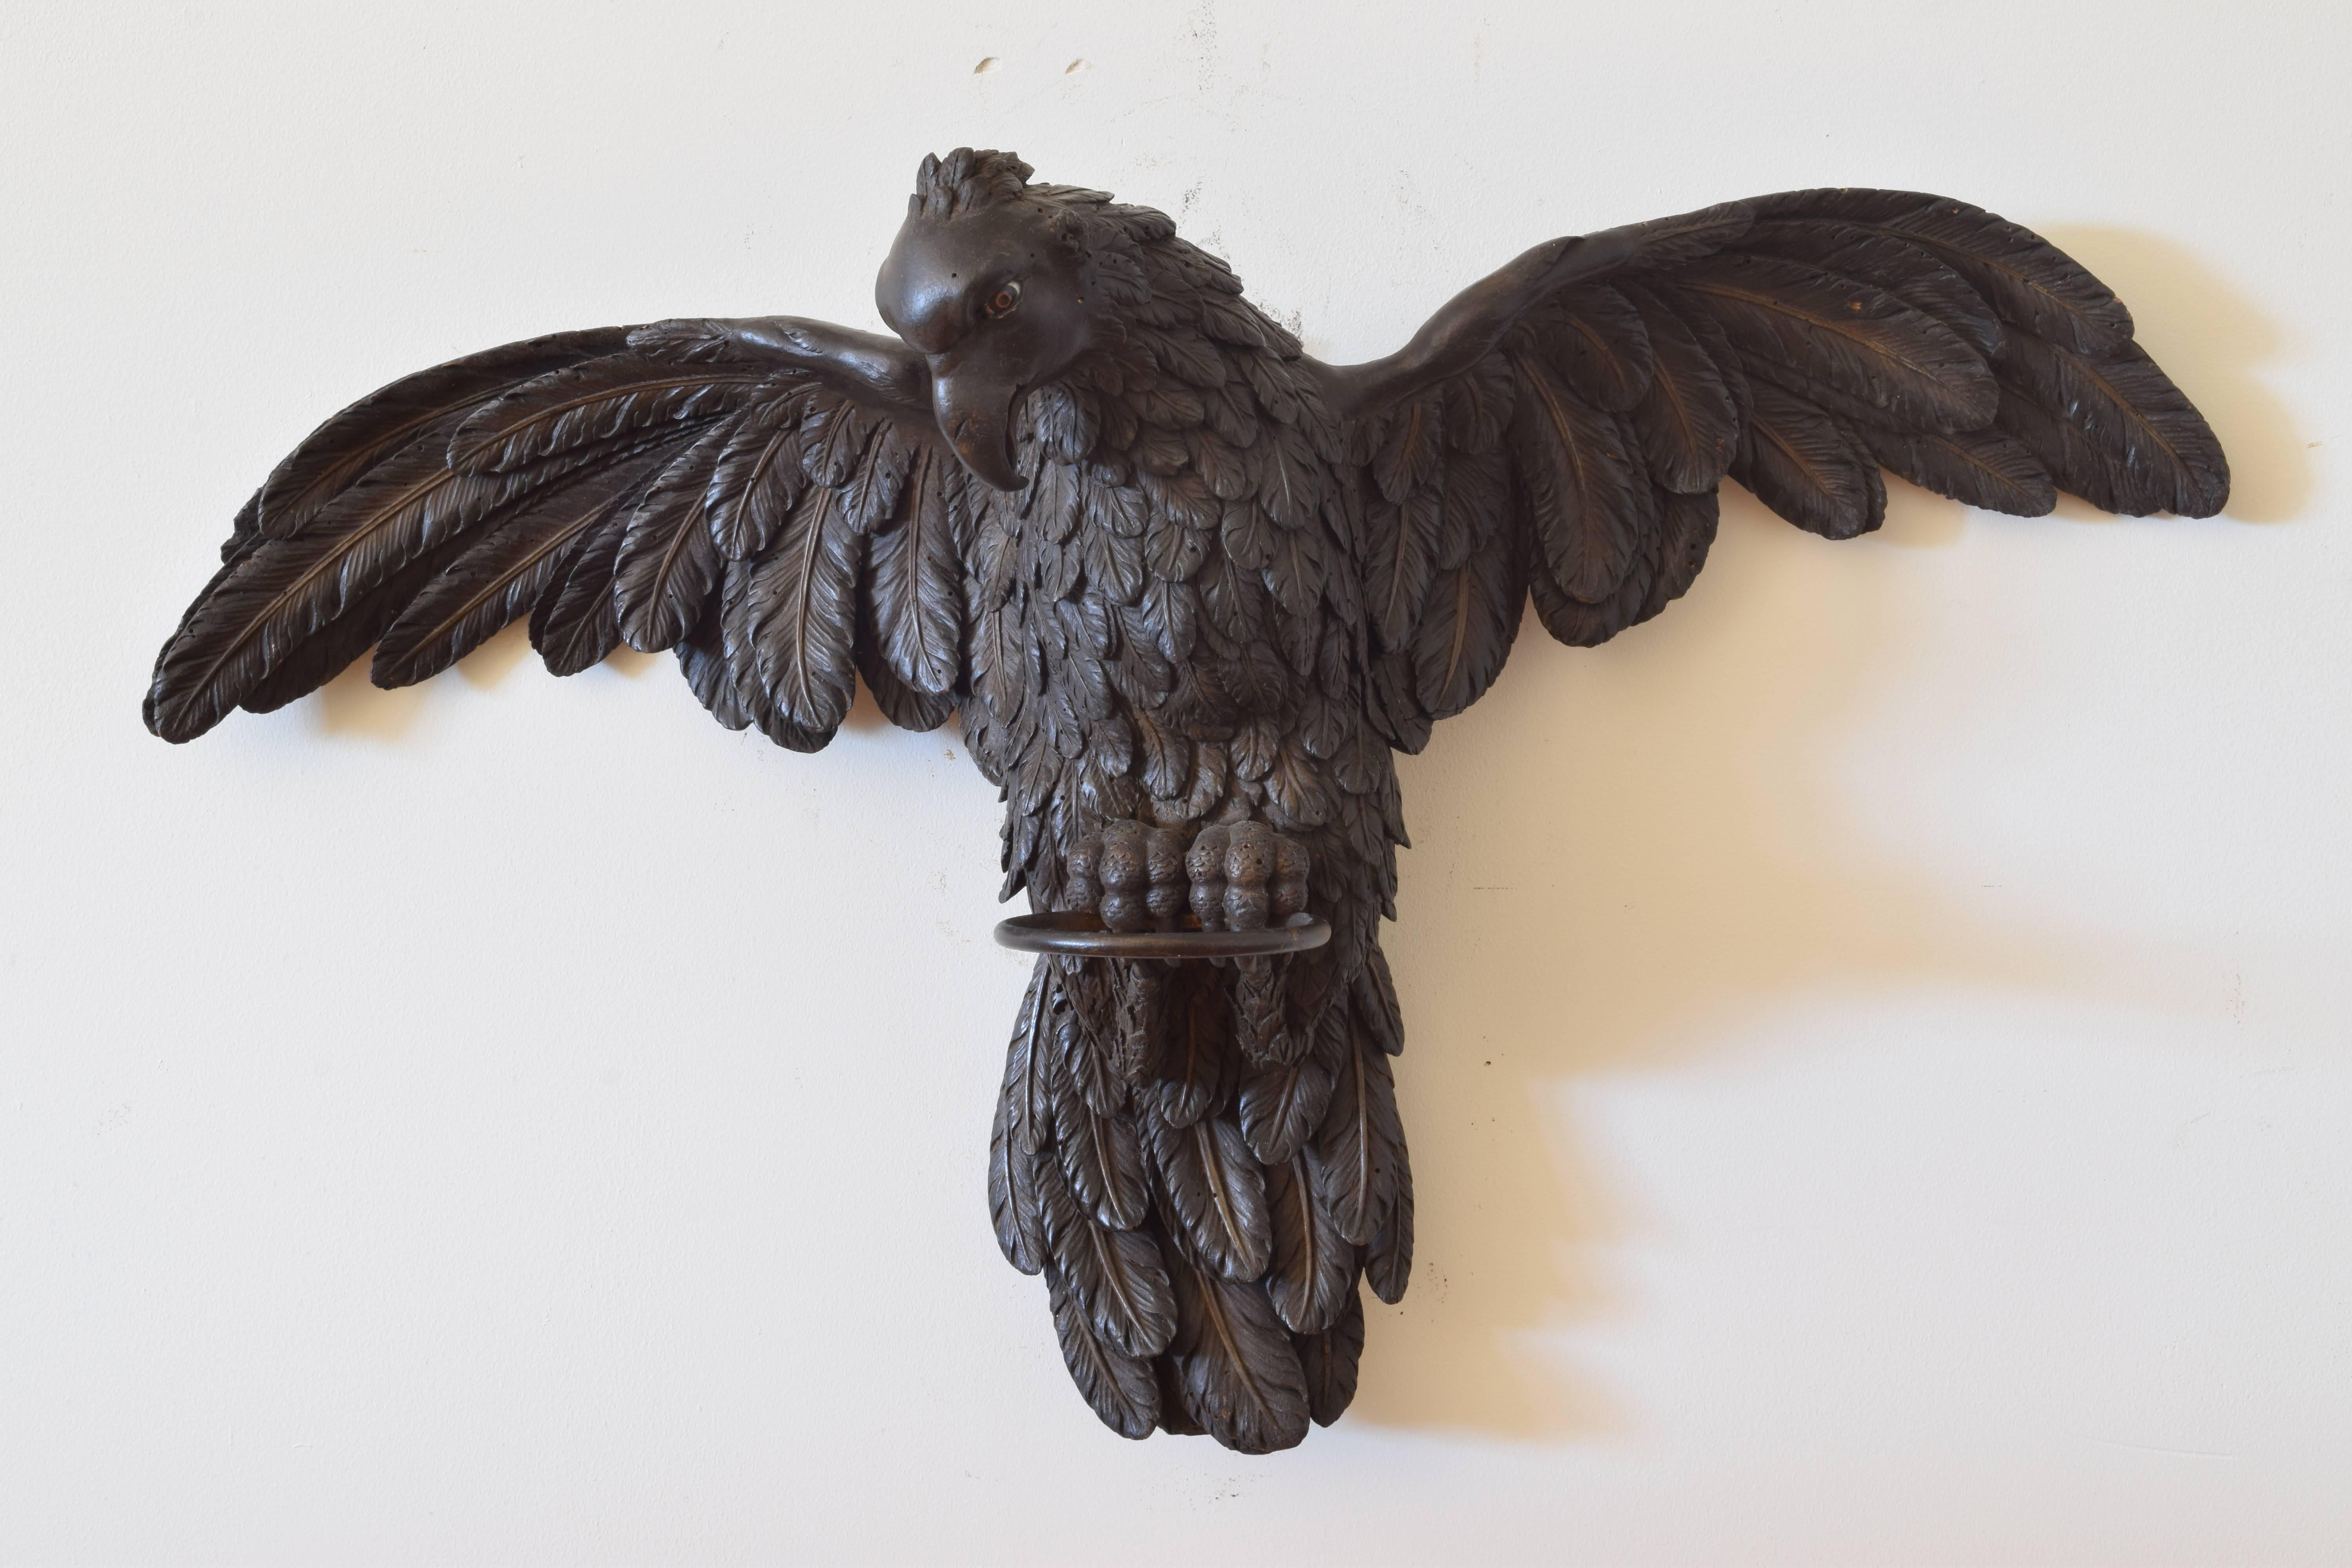 In excellent condition, beautifully carved with detailed feathers and talons, the eyes painted, retaining iron ring which was likely used for a fabric enclosure atop a poster bed.